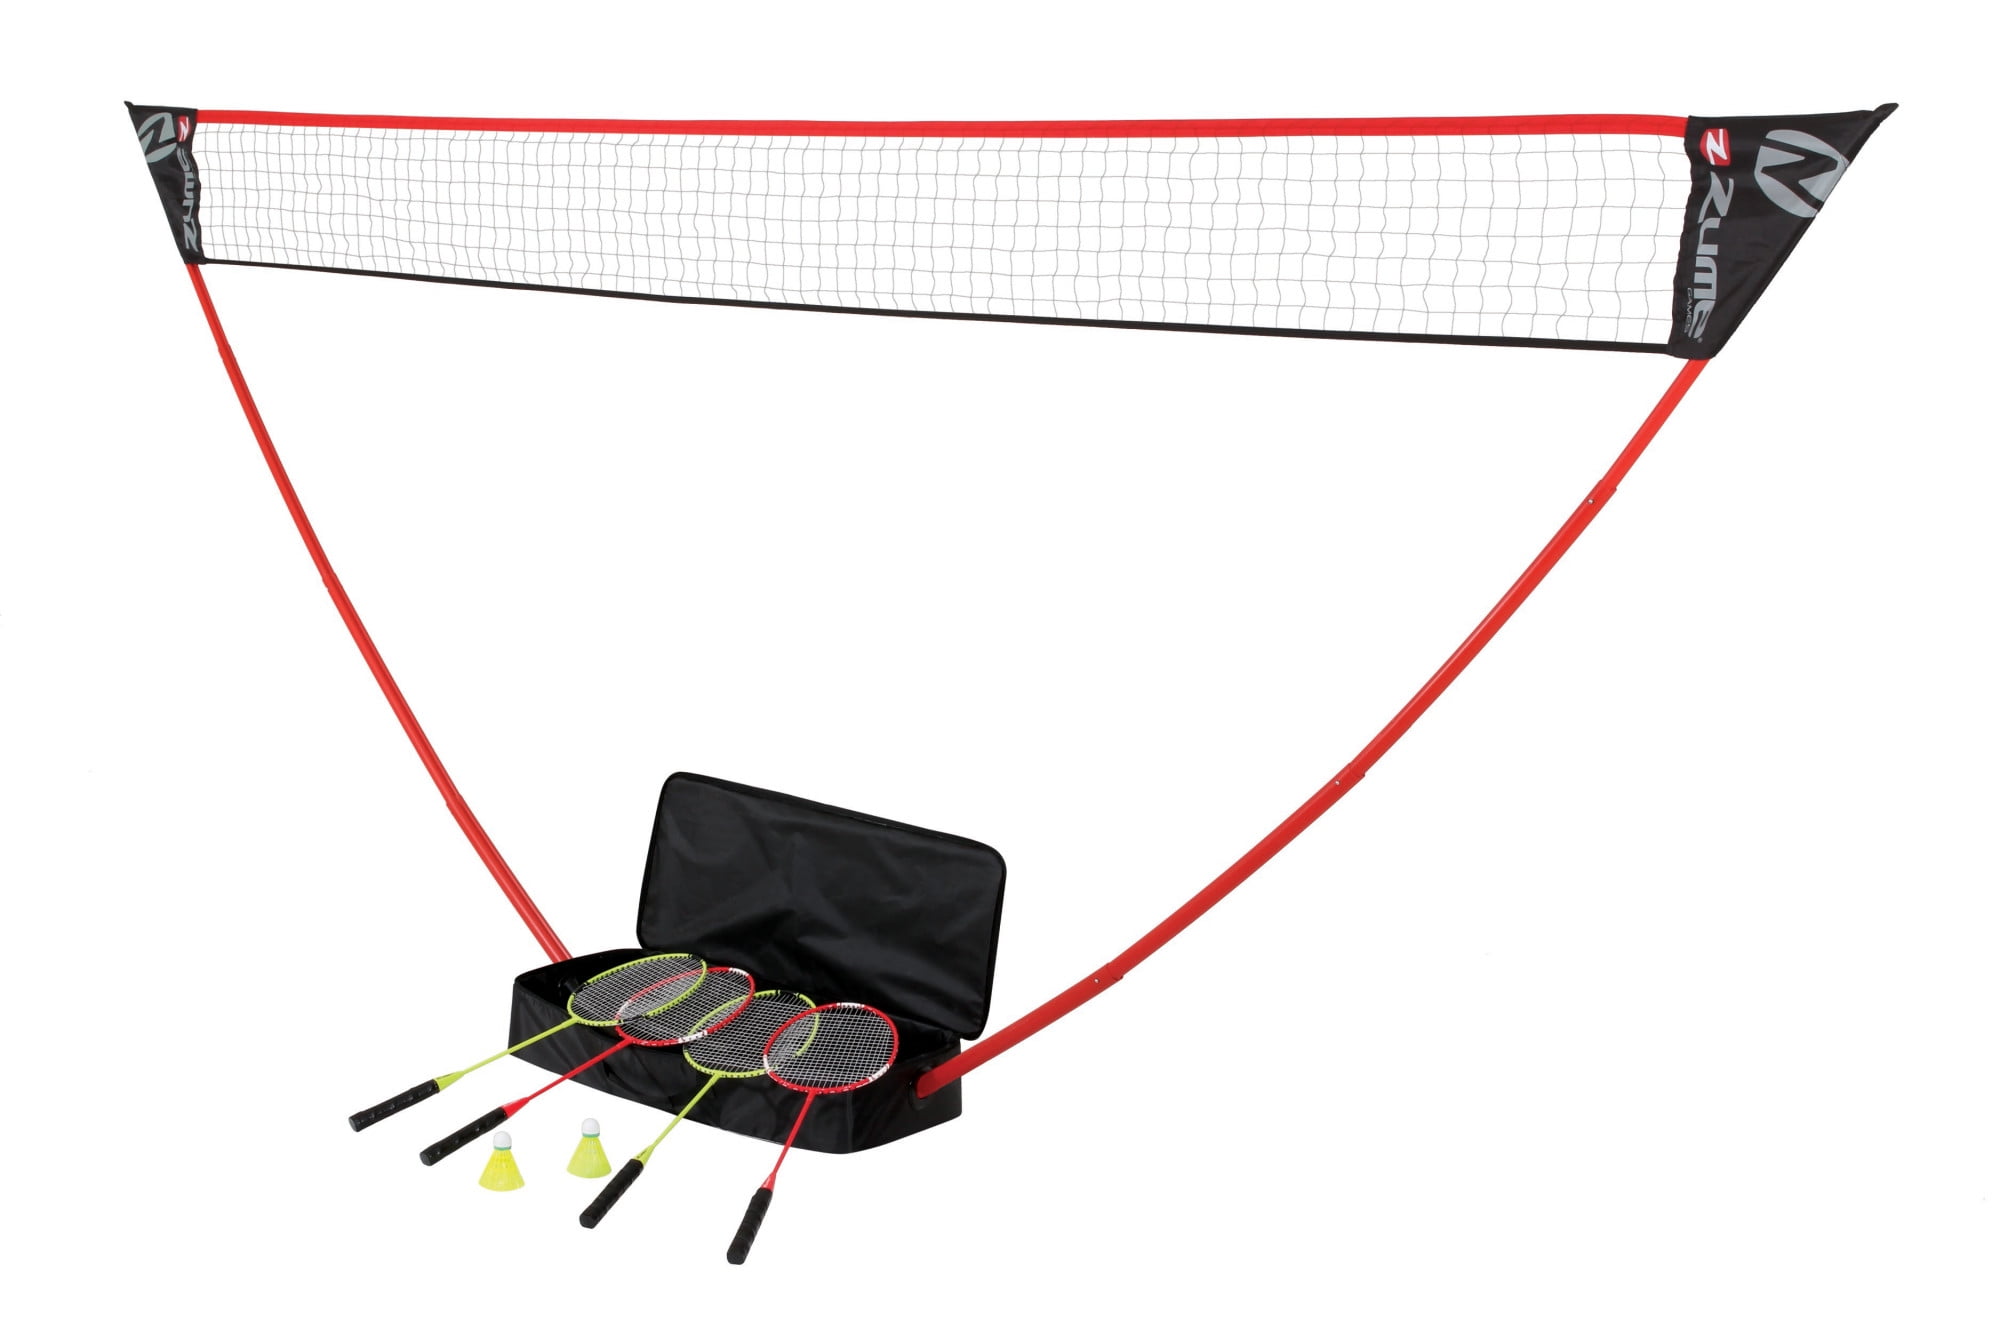 Zume Games Portable Badminton Set with Freestanding Base Sets Up on Any Surface in Seconds